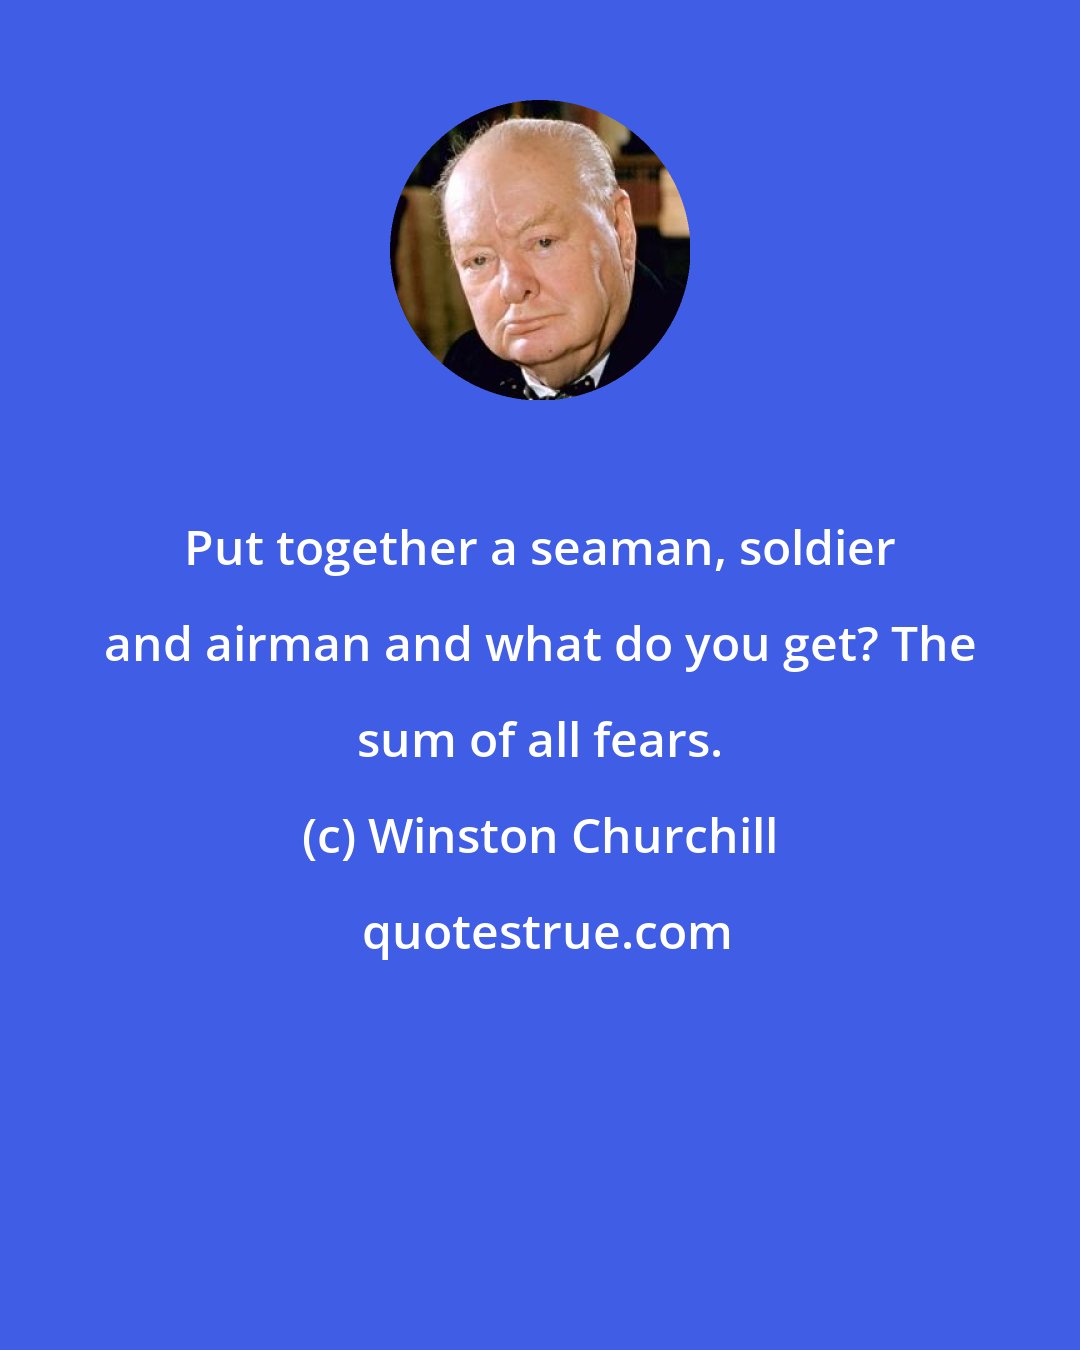 Winston Churchill: Put together a seaman, soldier and airman and what do you get? The sum of all fears.